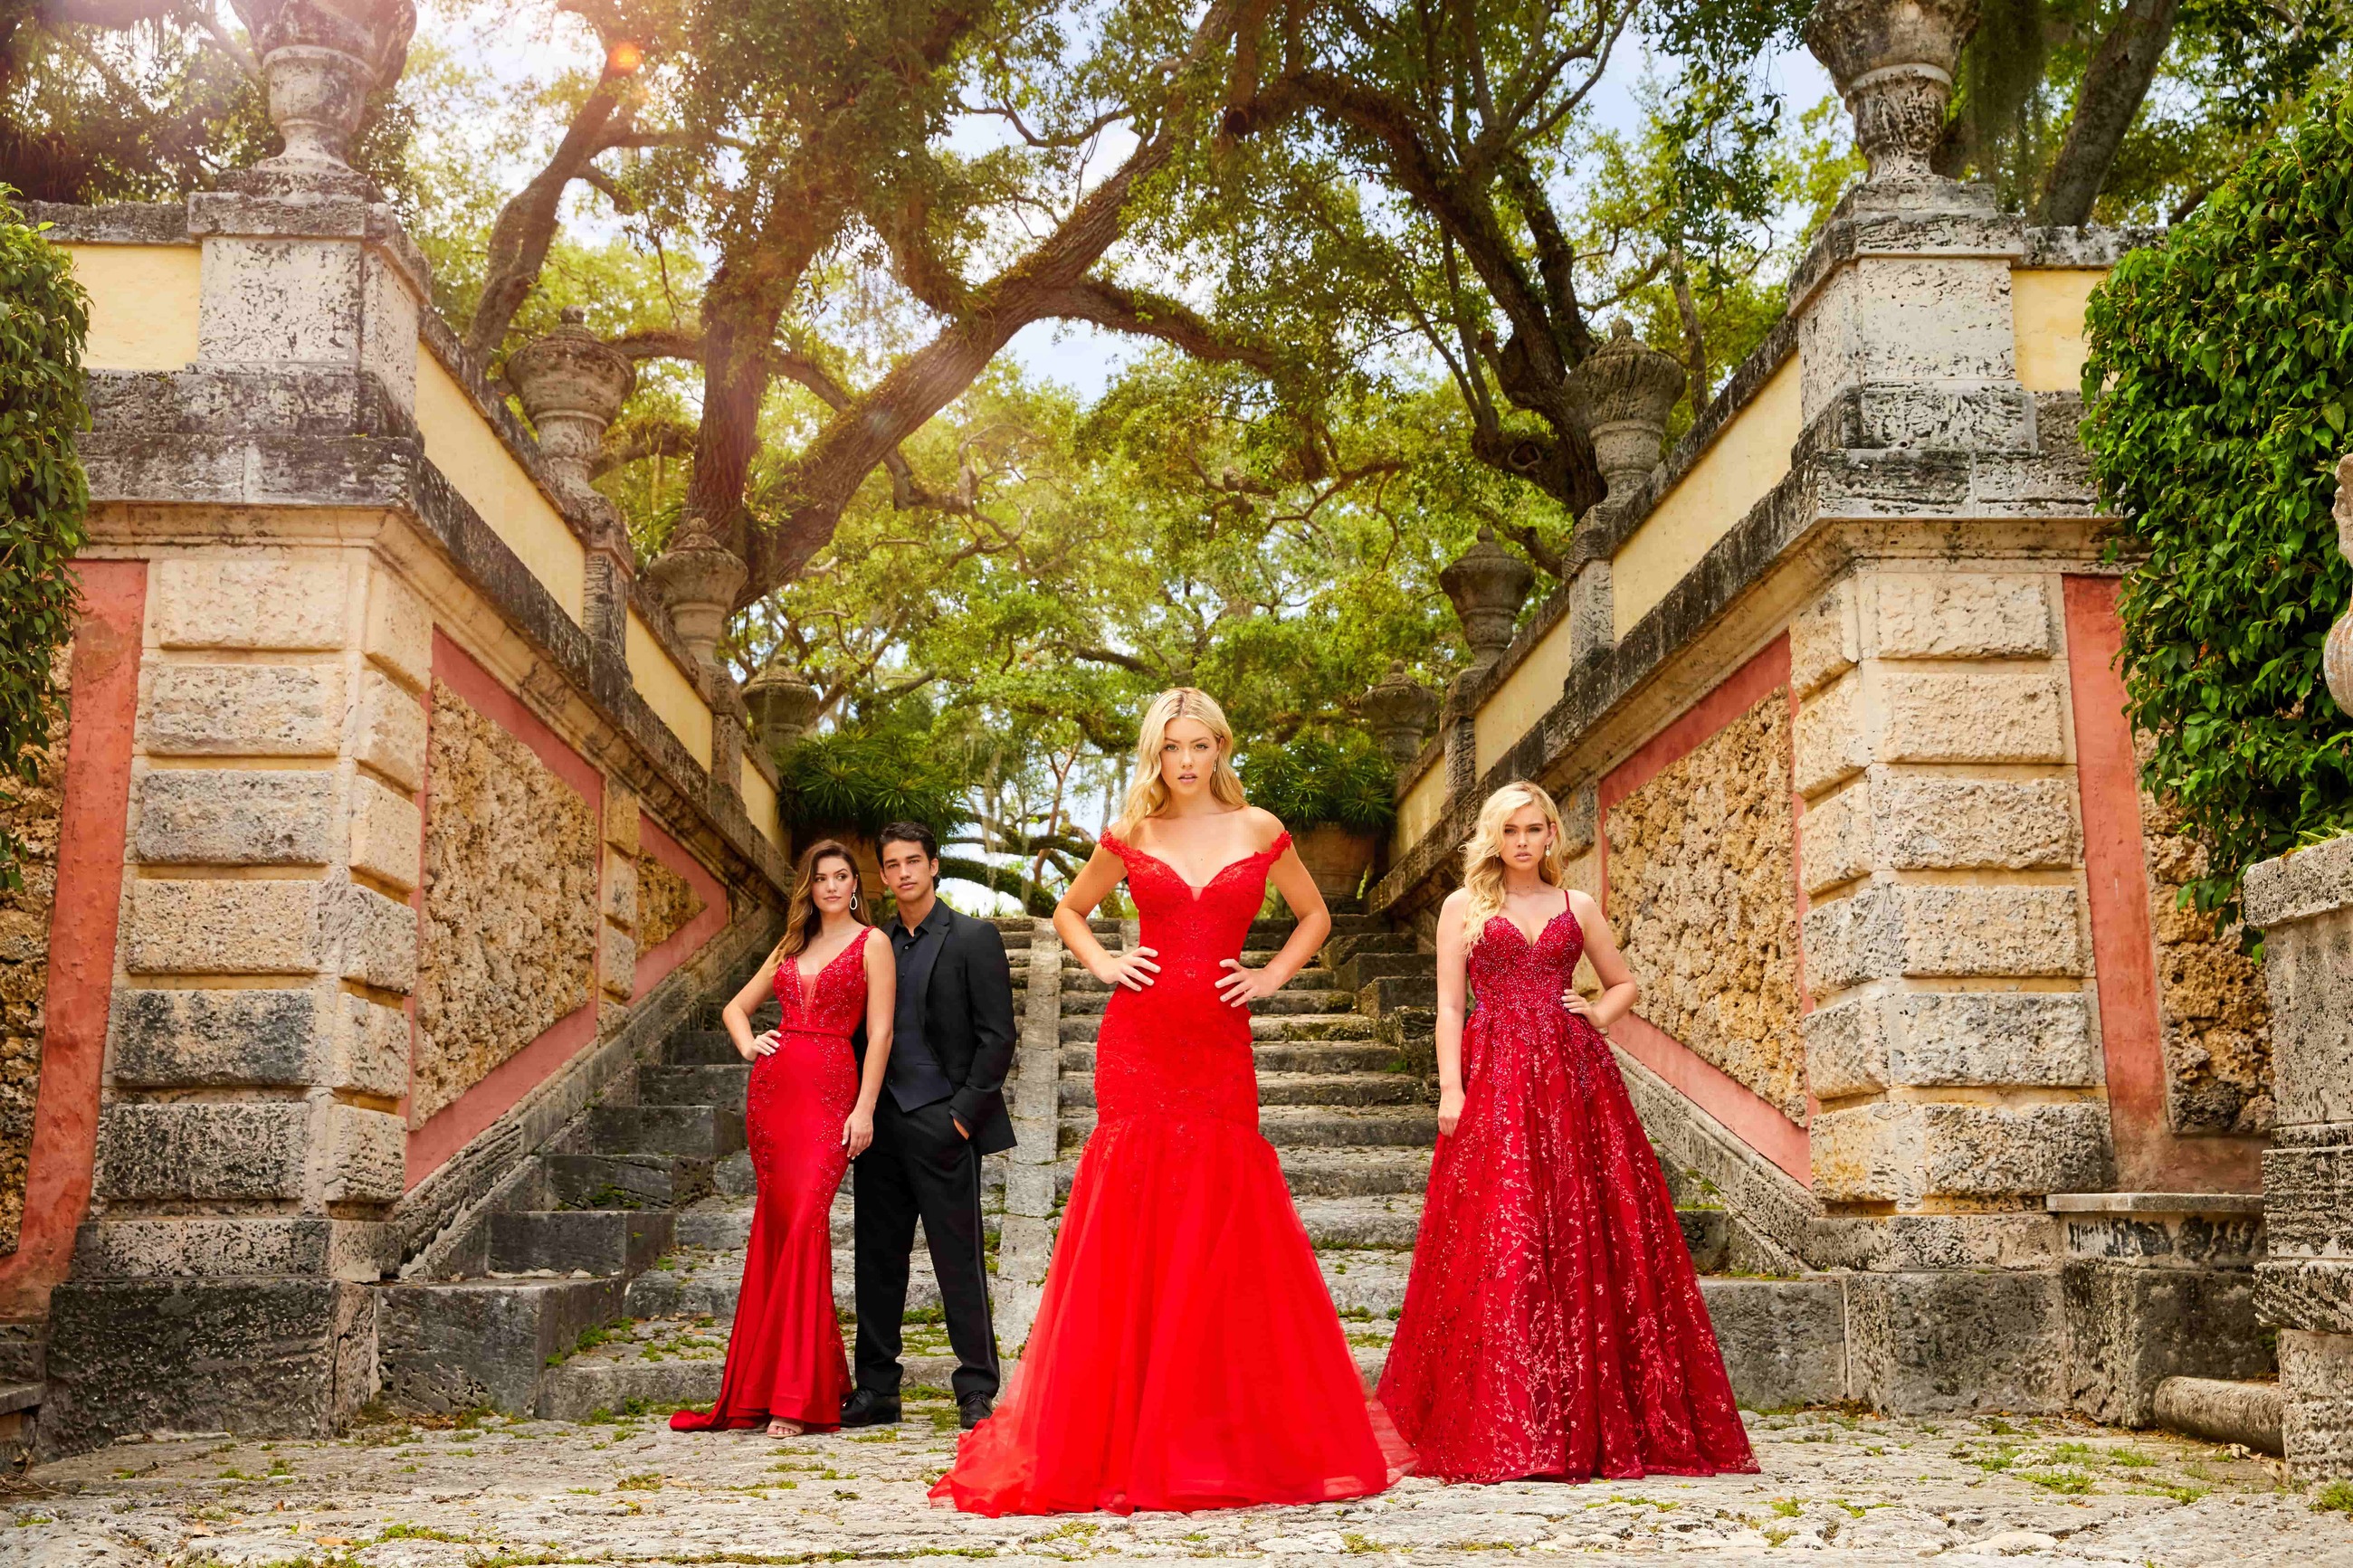 3 girls wearing red dresses of different shades and shapes